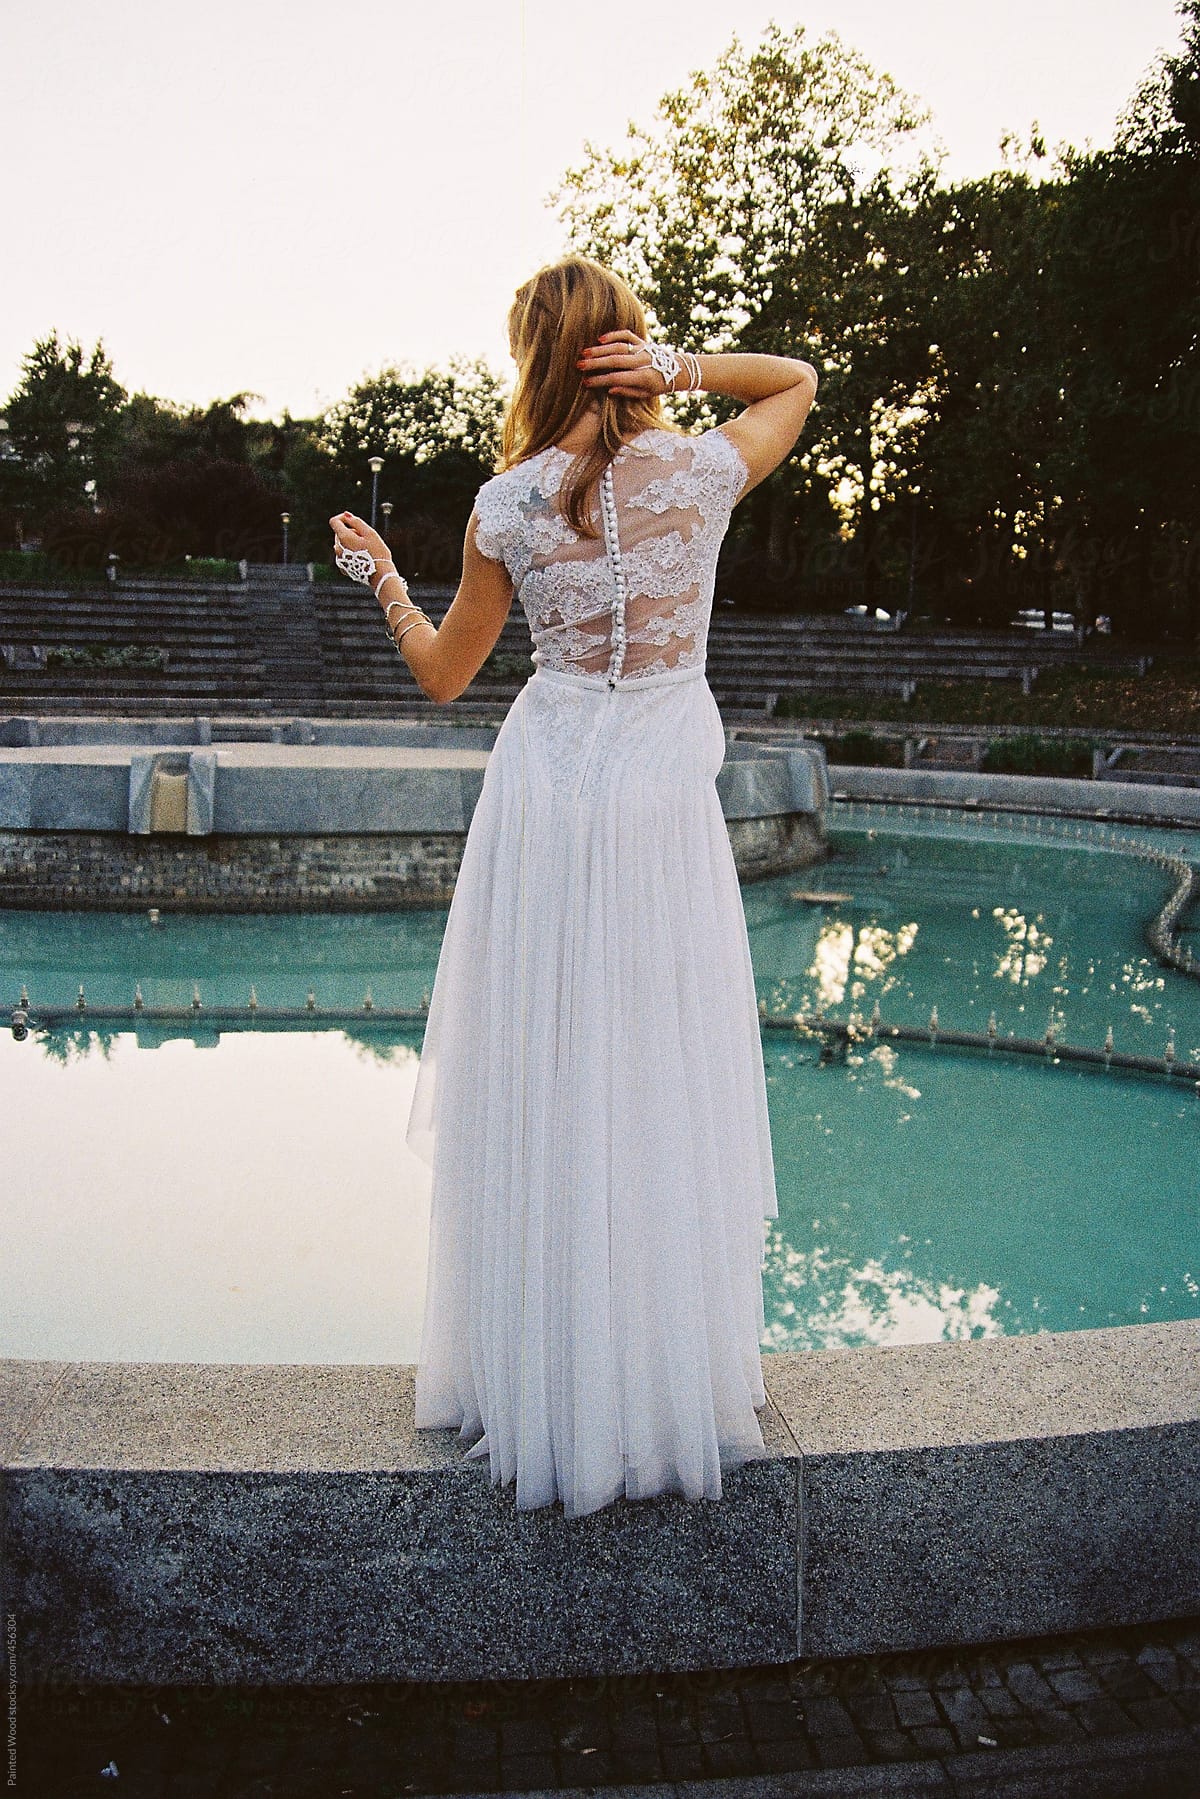 Bride in a romantic wedding dress in front of a fountain